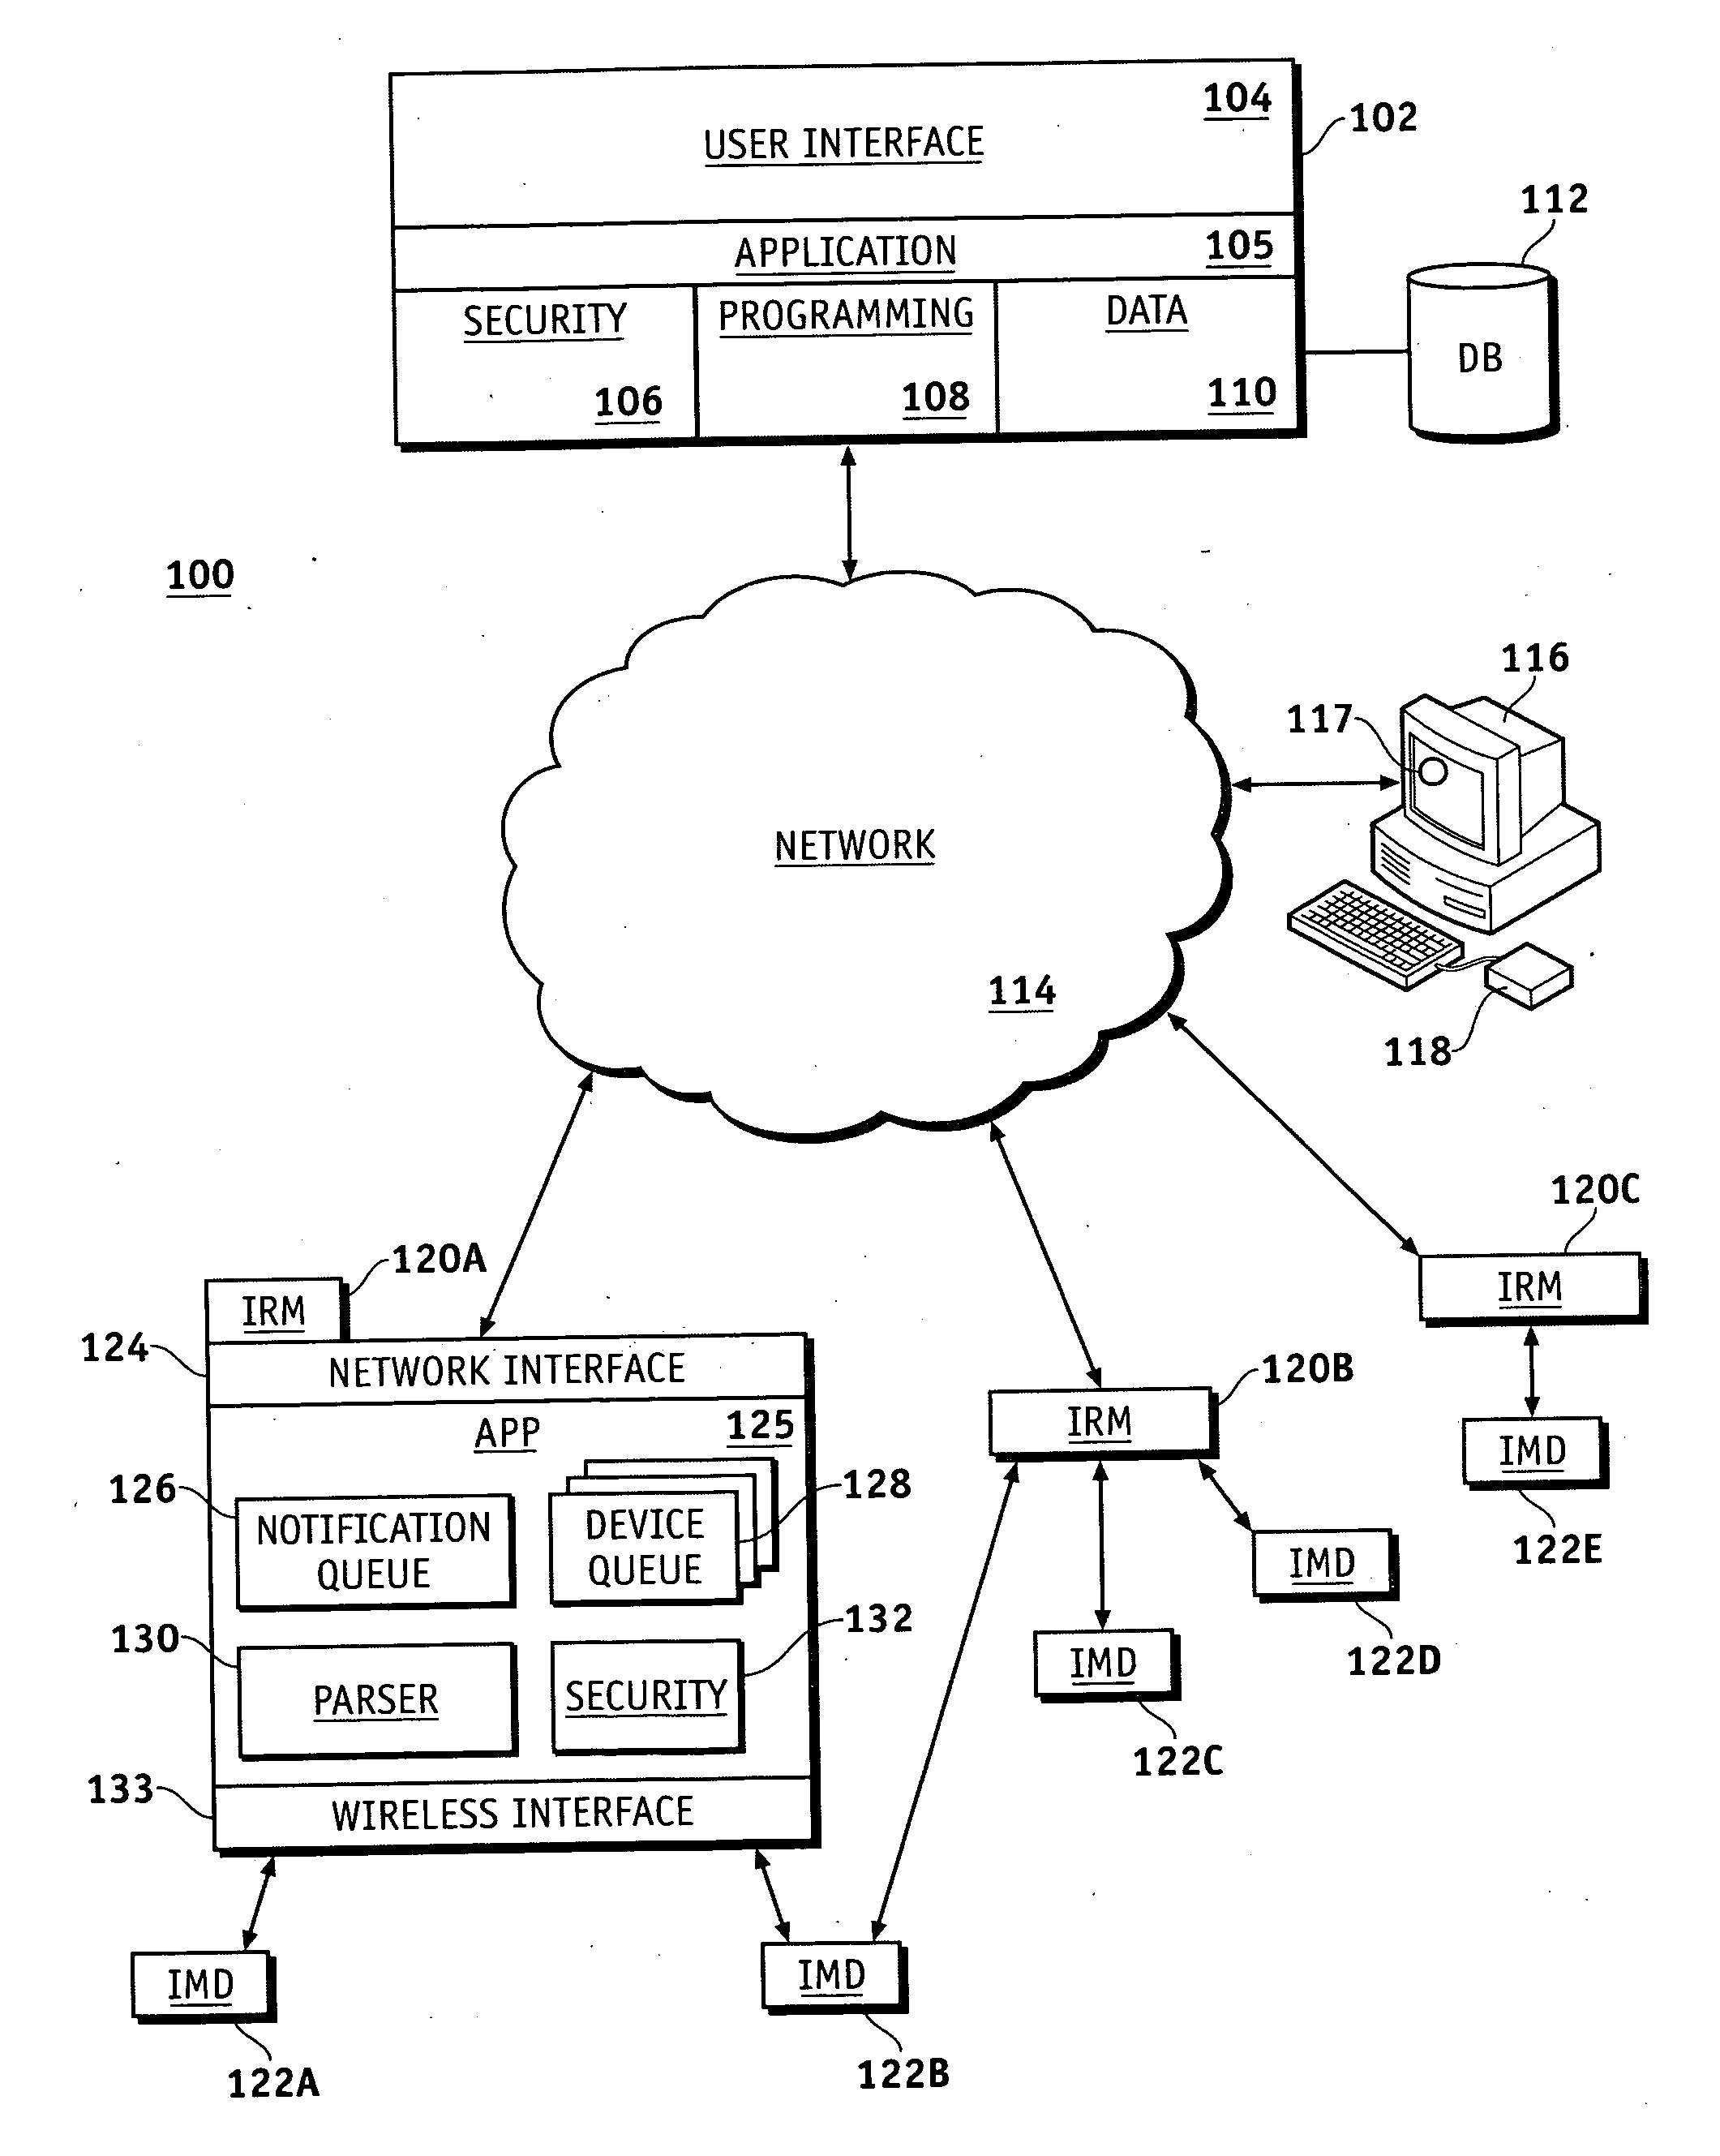 Command sequencing and interlocks for a remotely programmable implantable device